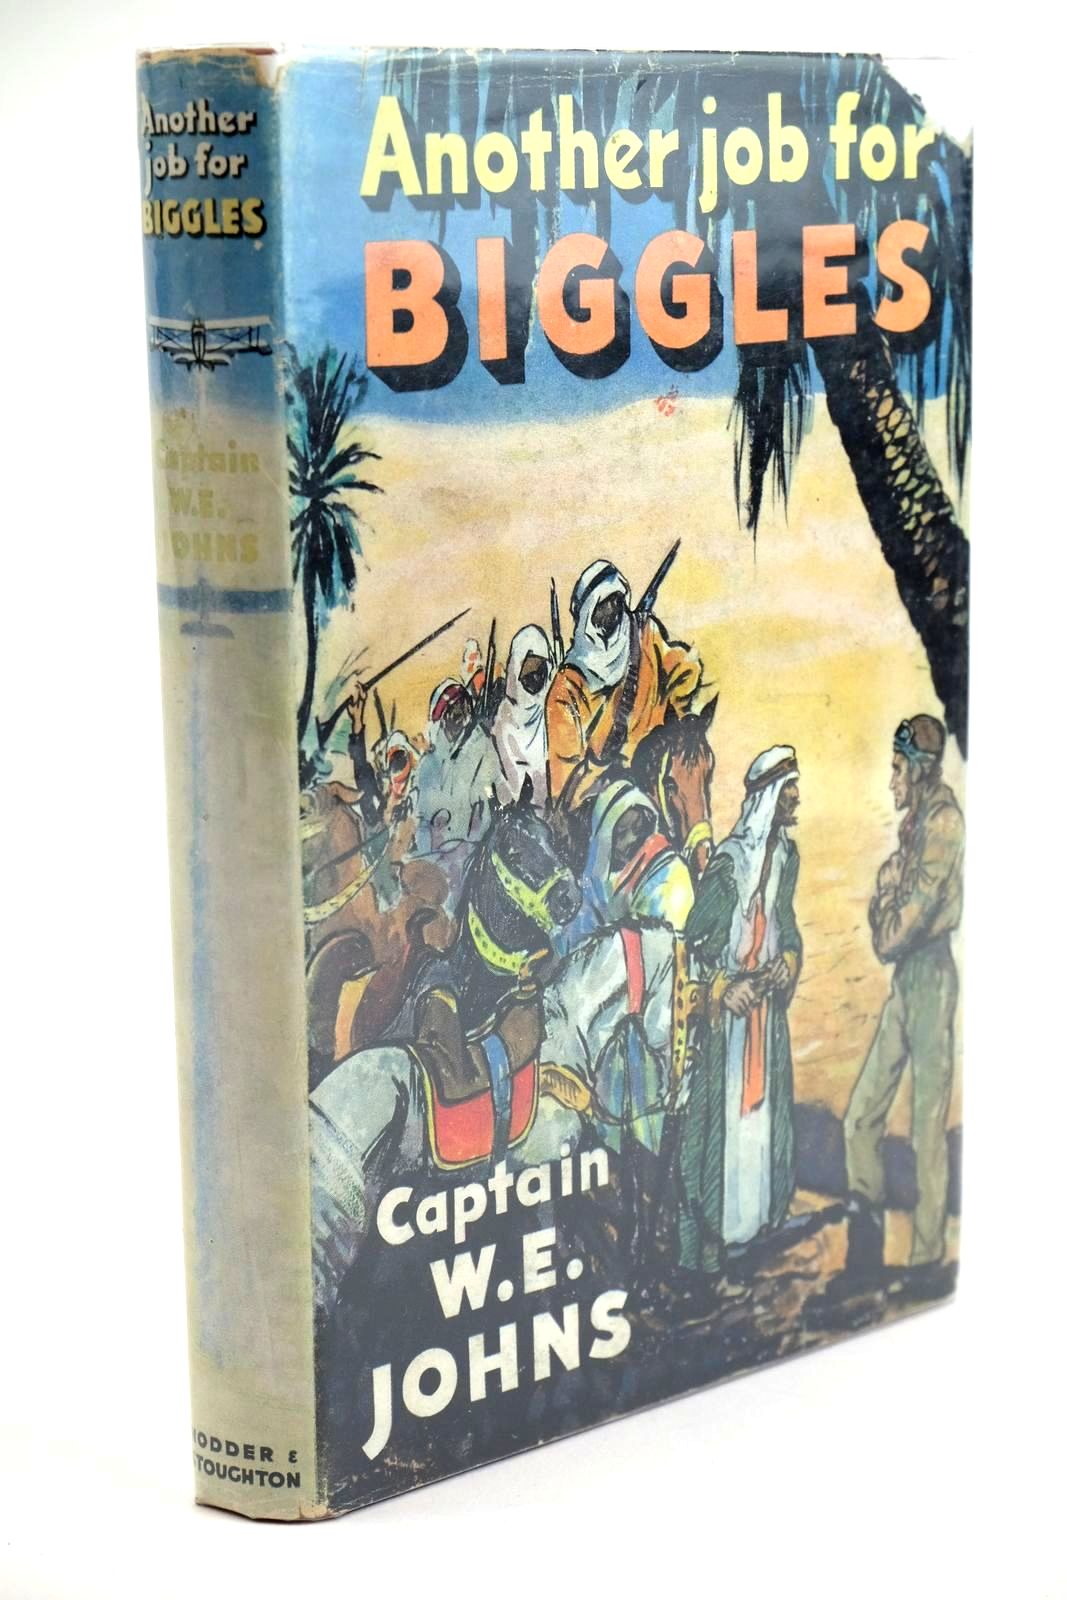 Photo of ANOTHER JOB FOR BIGGLES written by Johns, W.E. illustrated by Stead,  published by Hodder &amp; Stoughton (STOCK CODE: 1323400)  for sale by Stella & Rose's Books